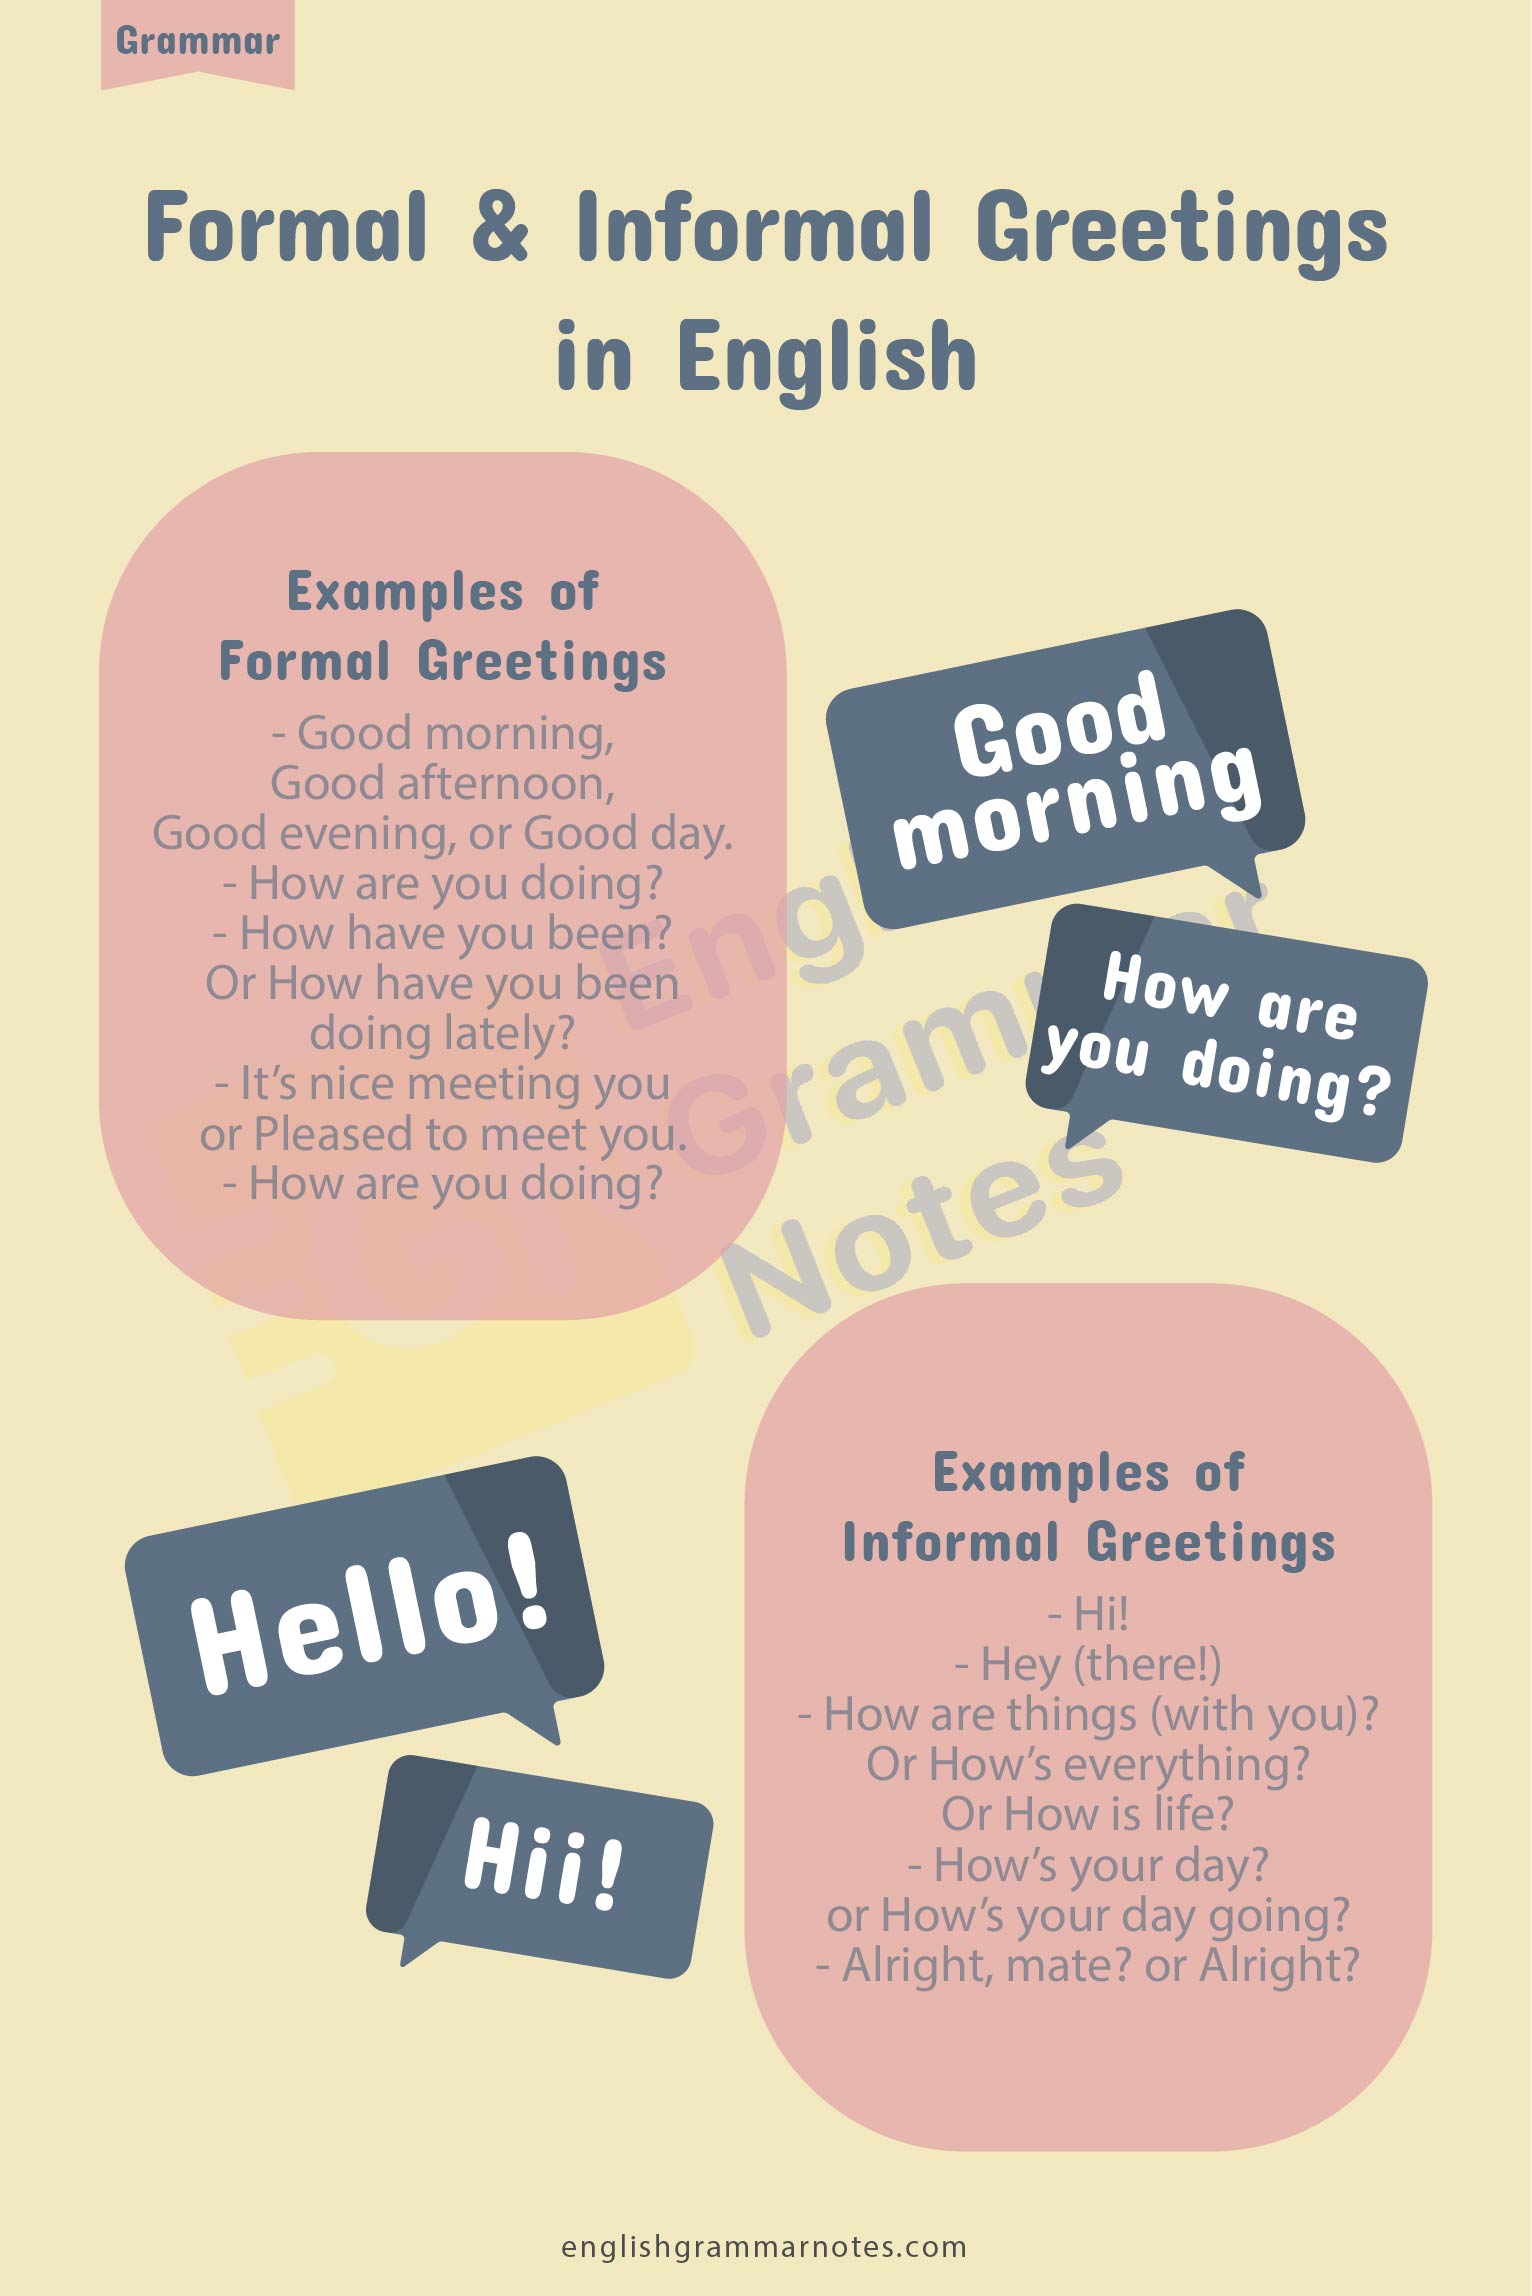 Formal and Informal Greetings in English 2